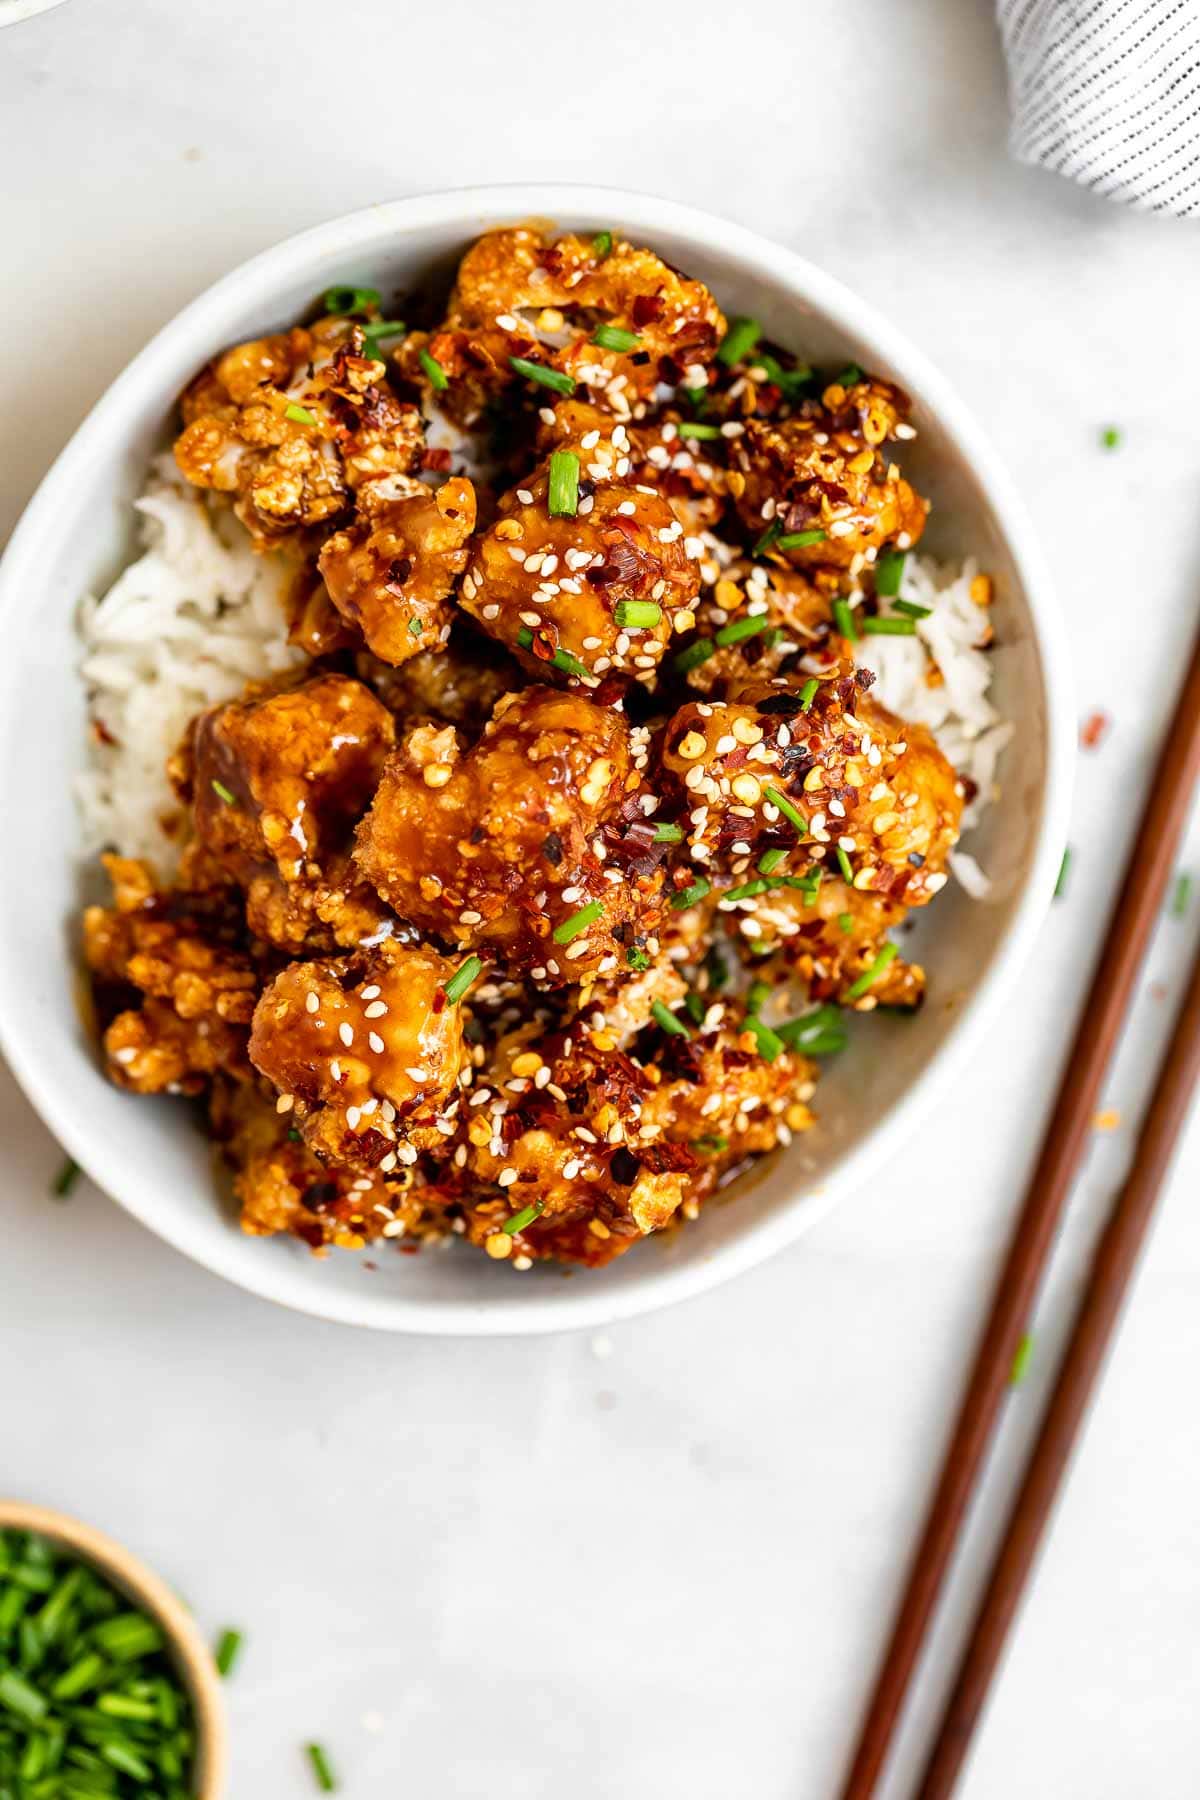 Crispy baked sesame cauliflower in a bowl with chopsticks on the side.